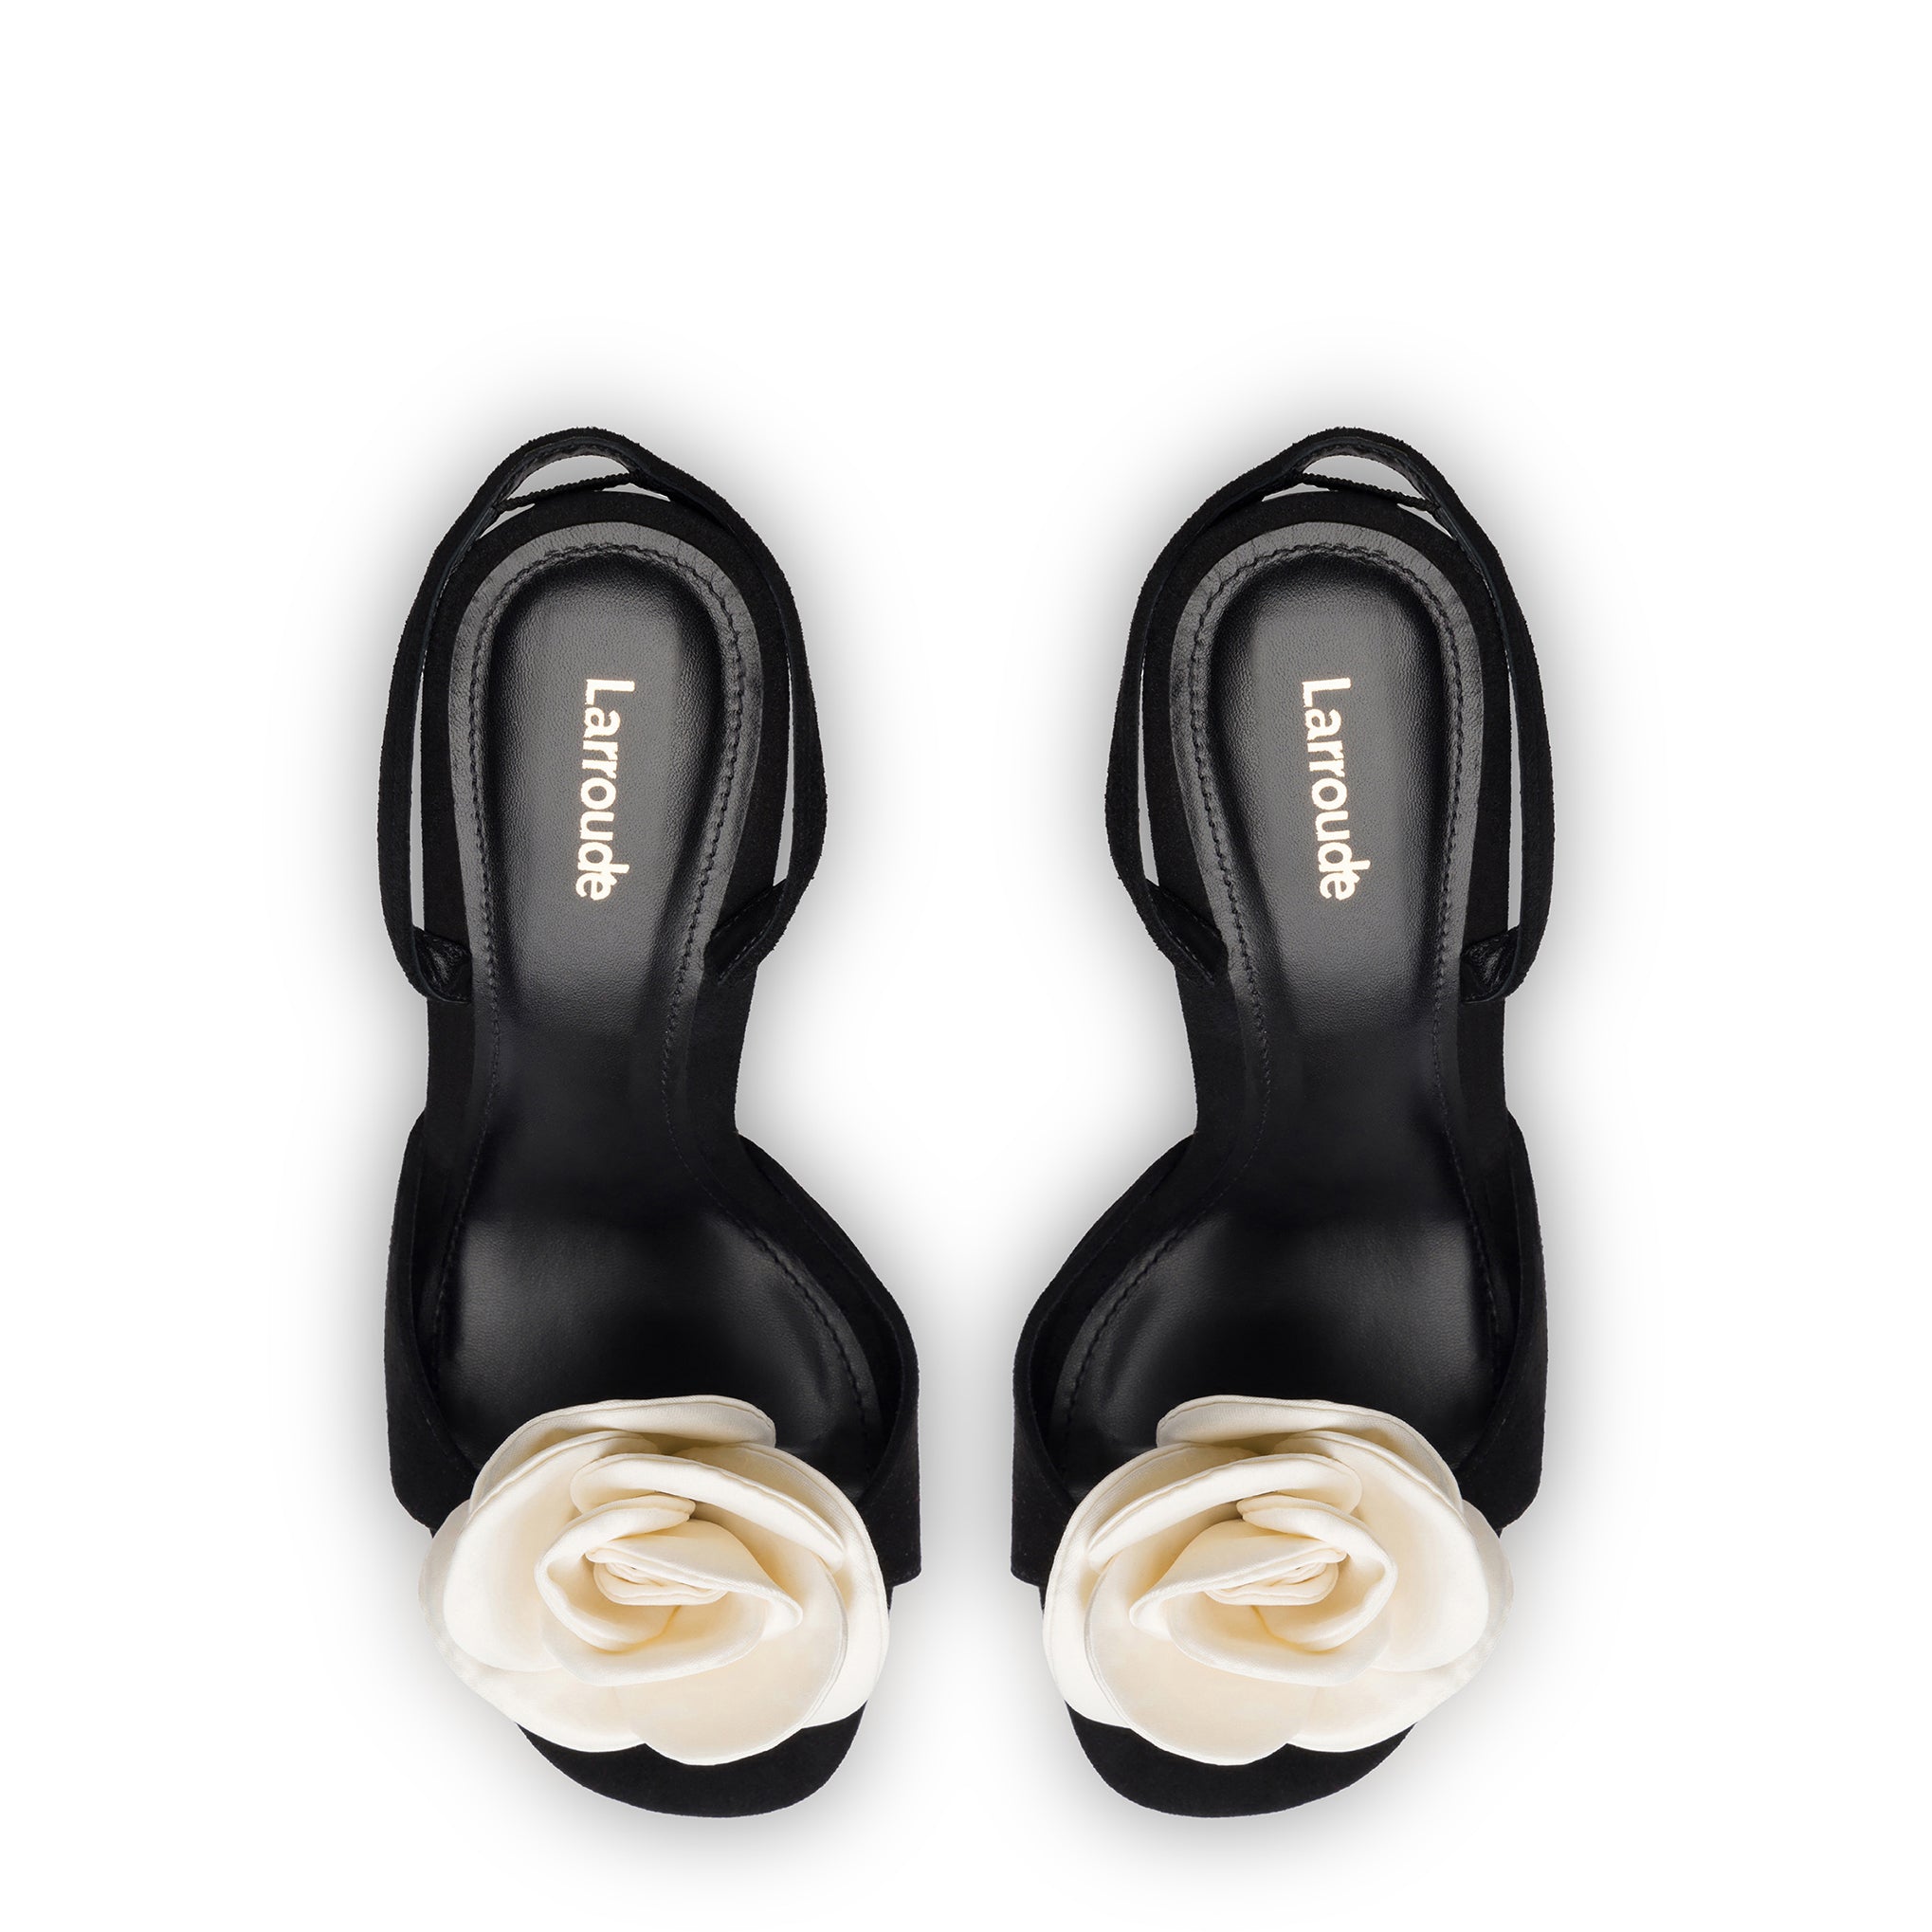 Salma Sandal In Black Suede and Ivory Satin